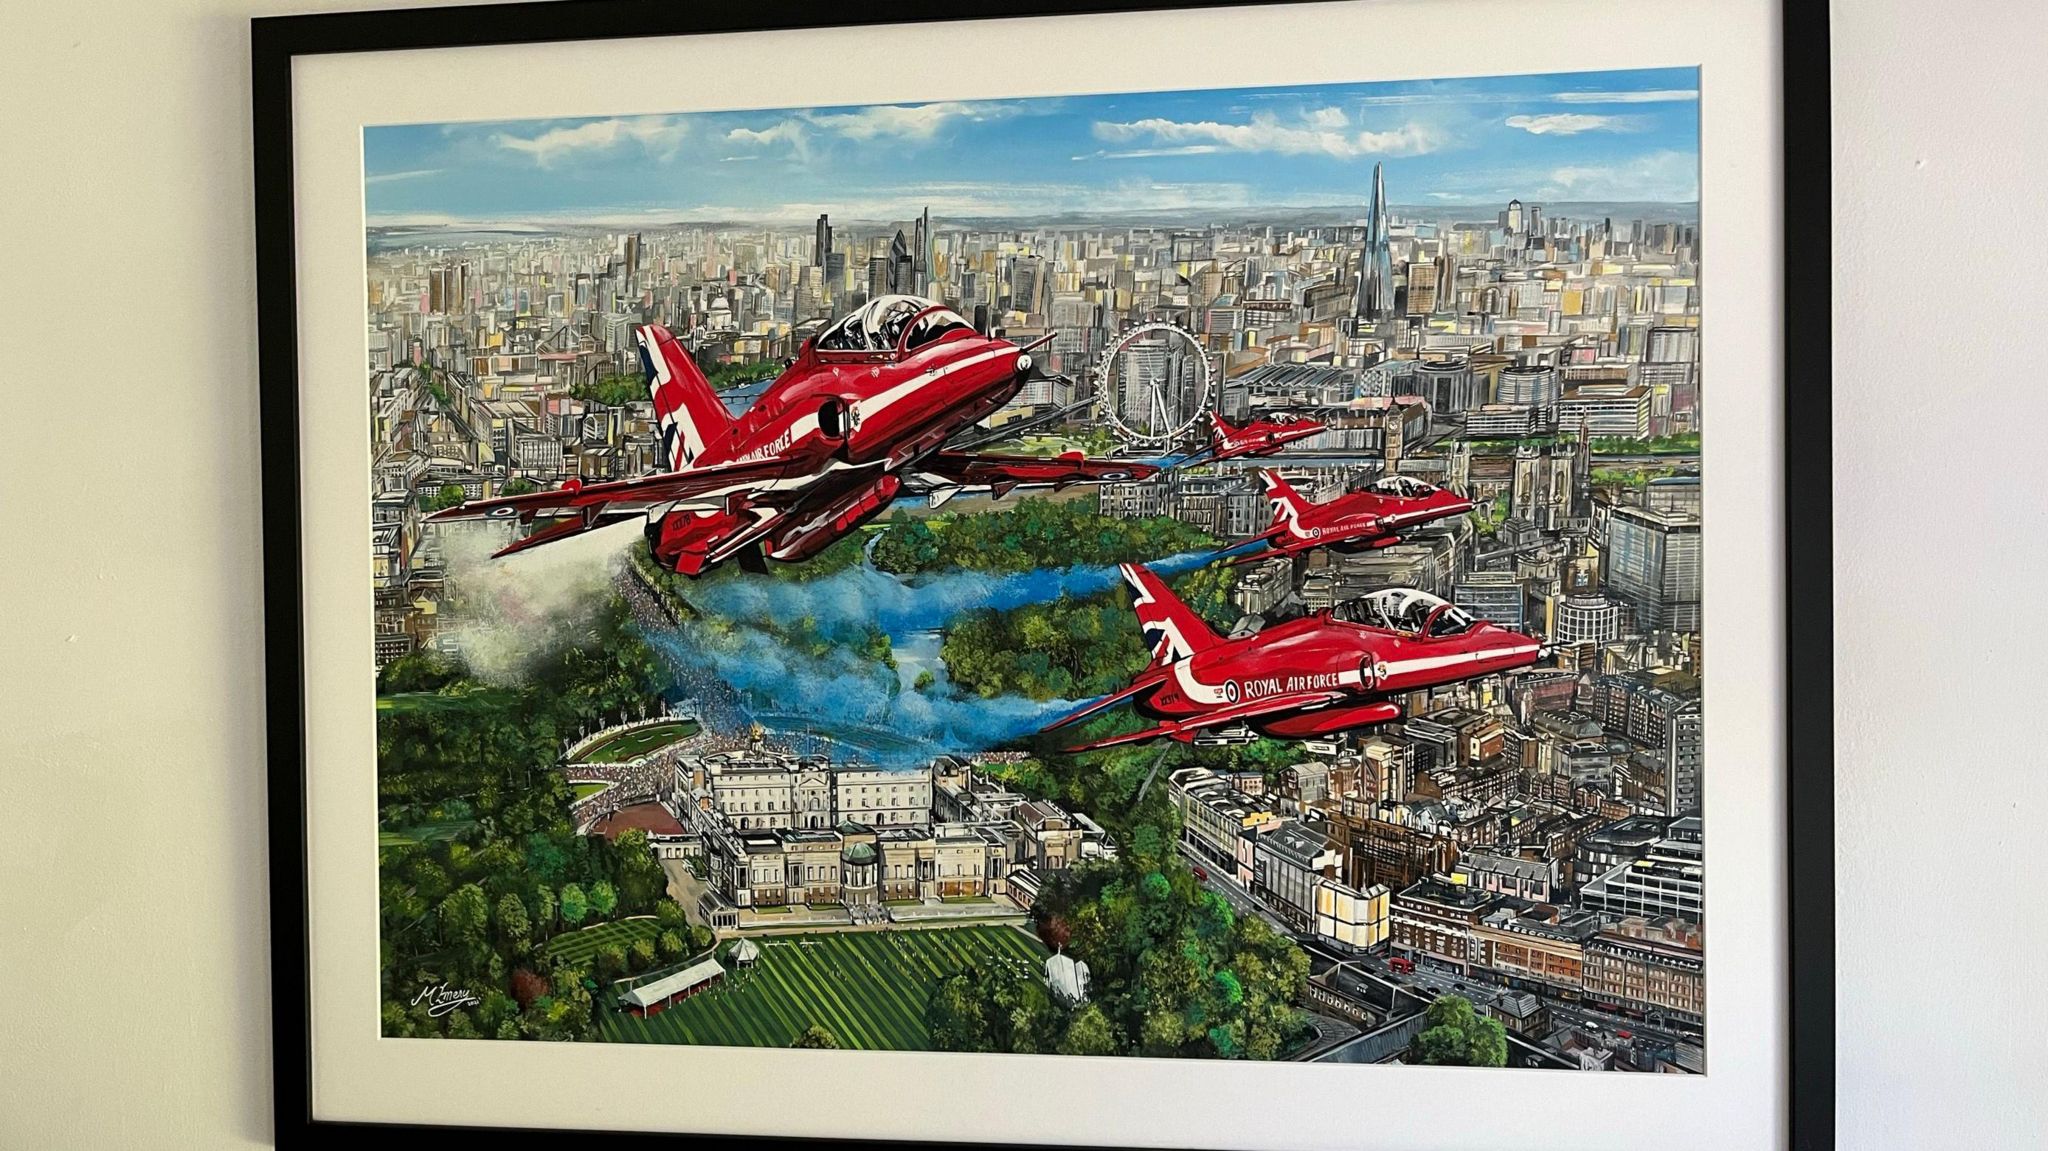 A painting of the Red Arrows, with central London the backdrop